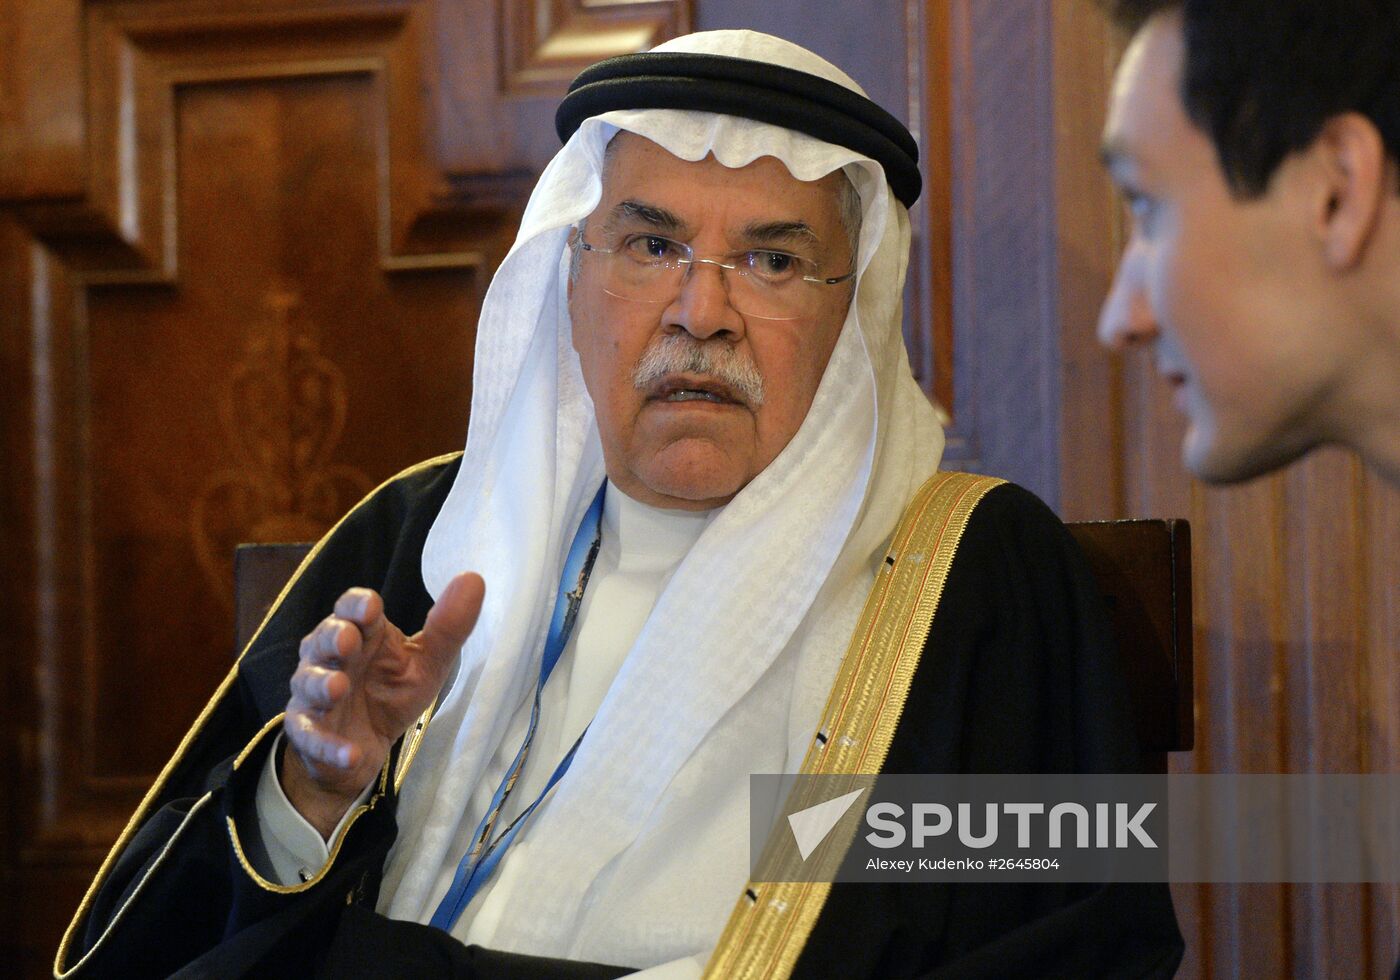 Russian Energy Ministry, Saudi Oil Ministry sign joint documents